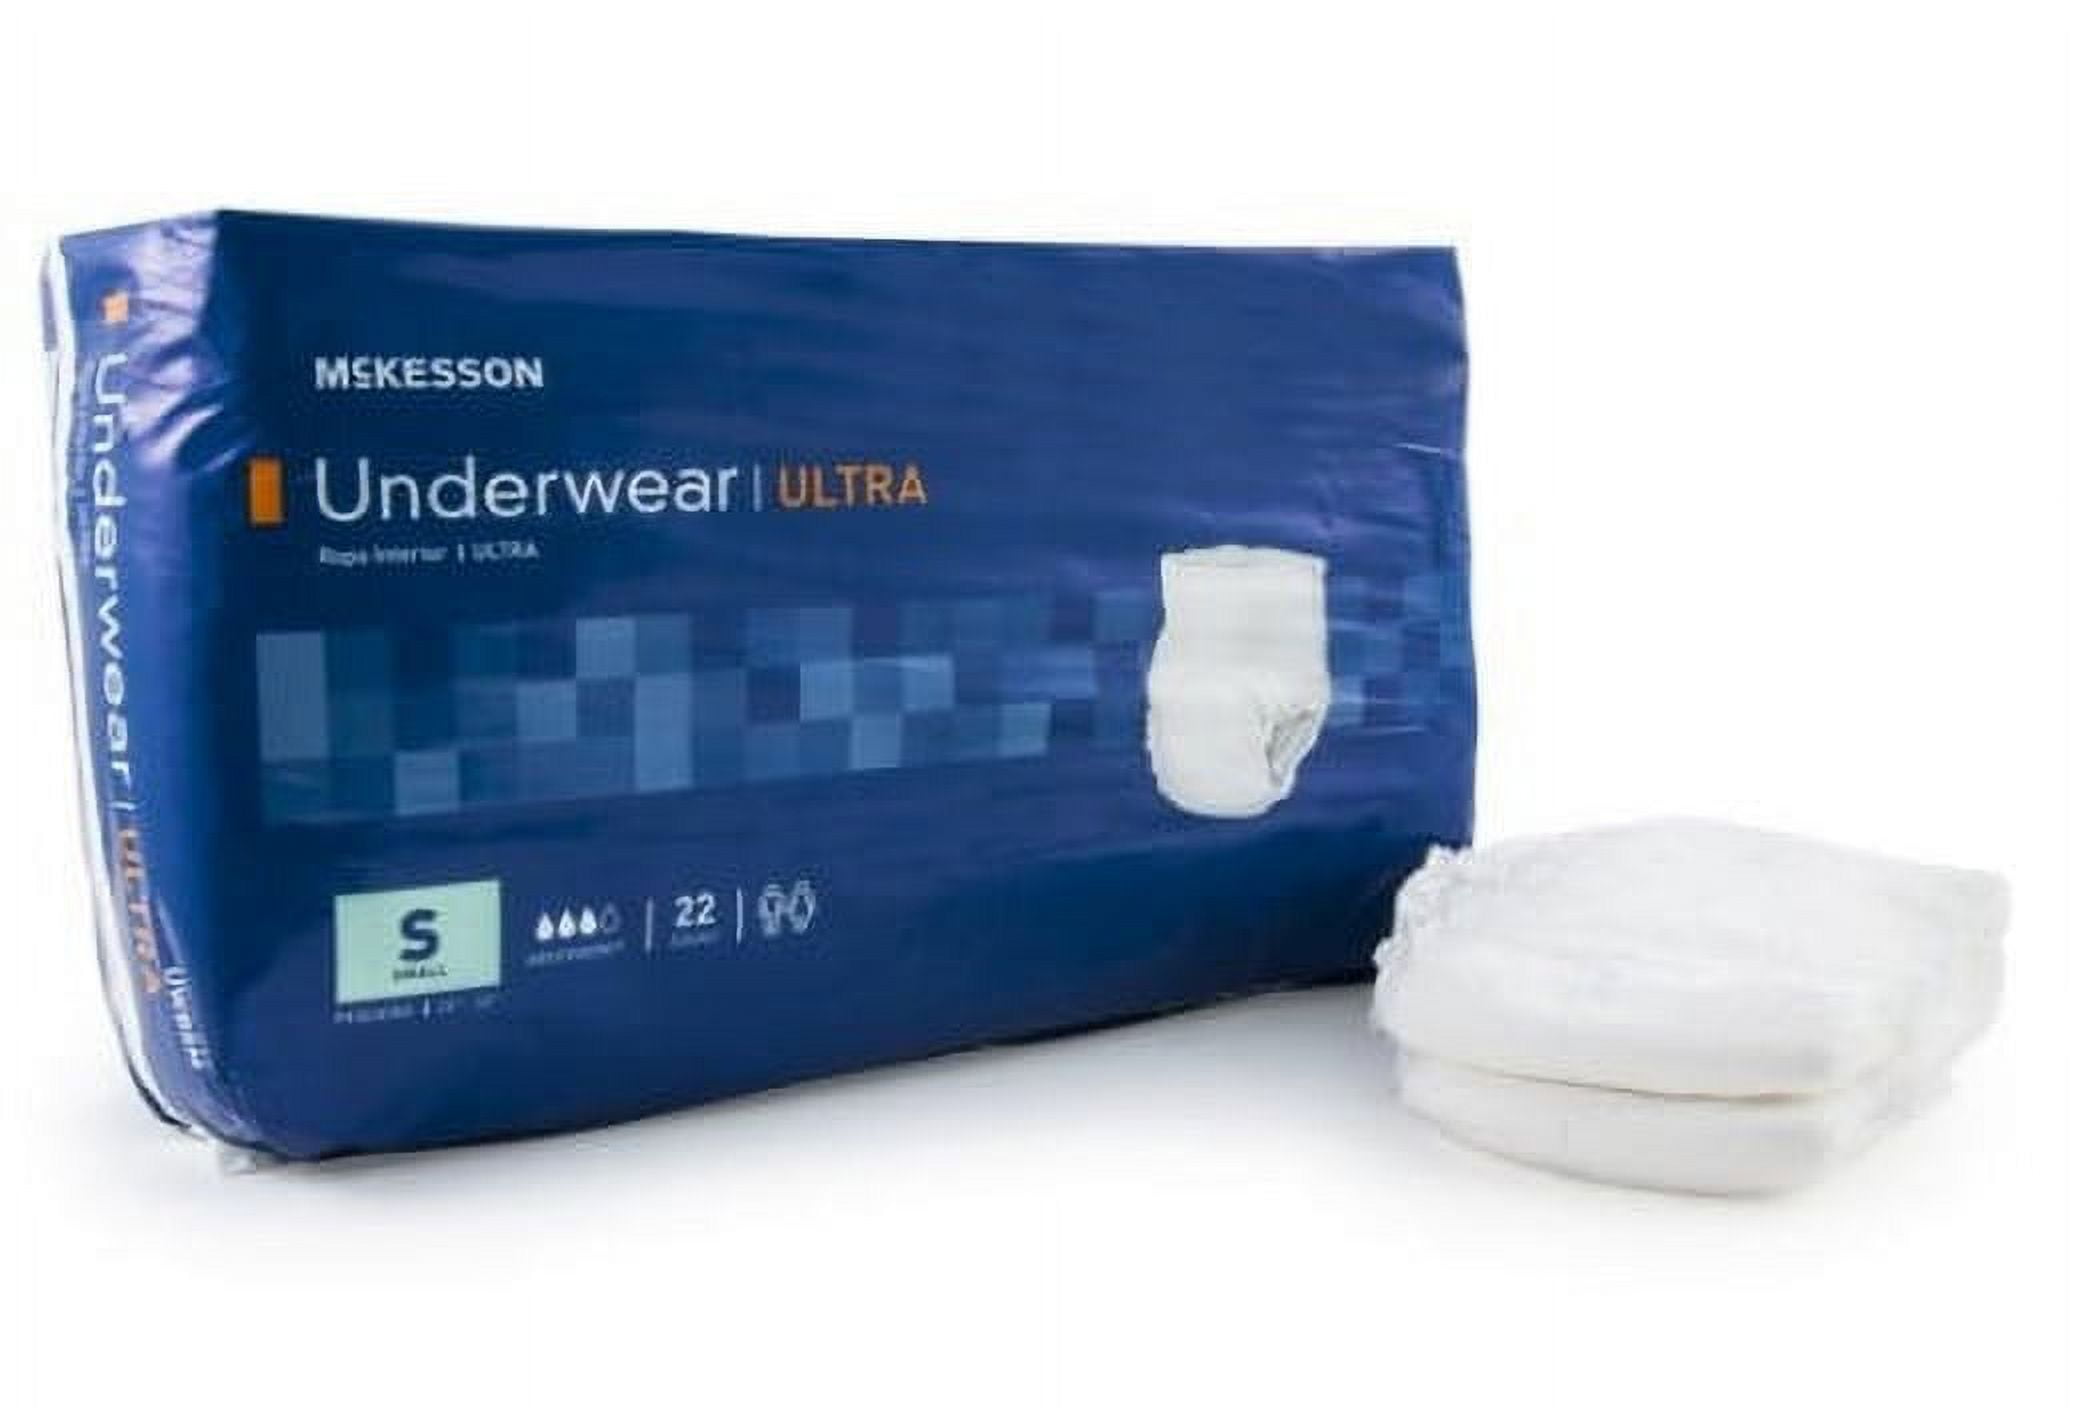 Men's Washable Incontinence Underwear Diaper Pants Urinary